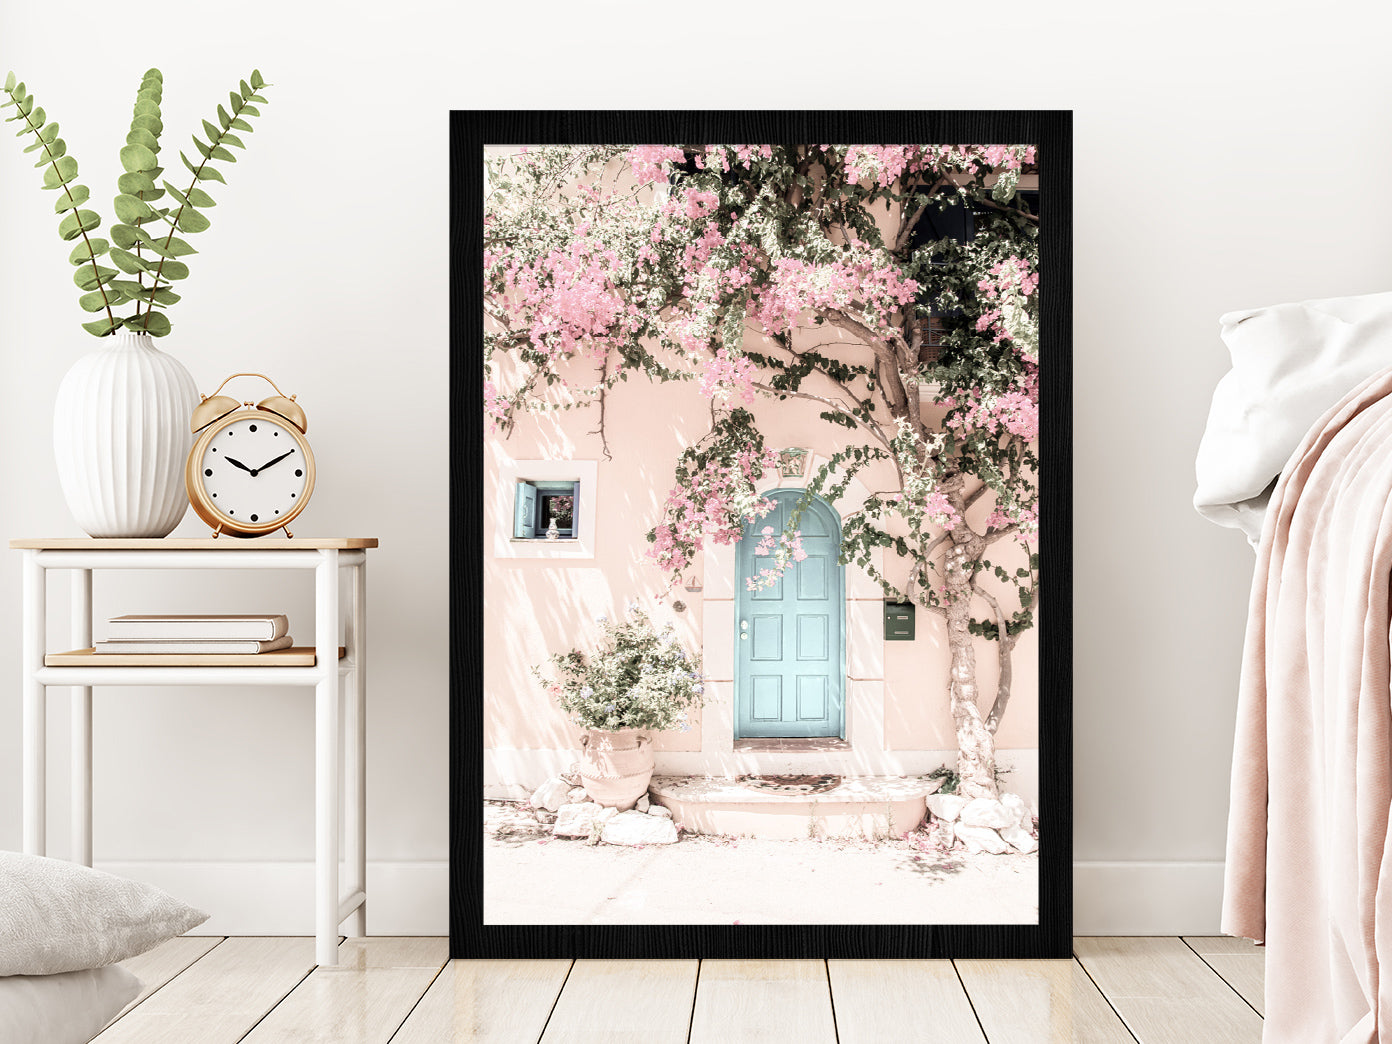 House & Flower Tree Faded Photograph Glass Framed Wall Art, Ready to Hang Quality Print Without White Border Black